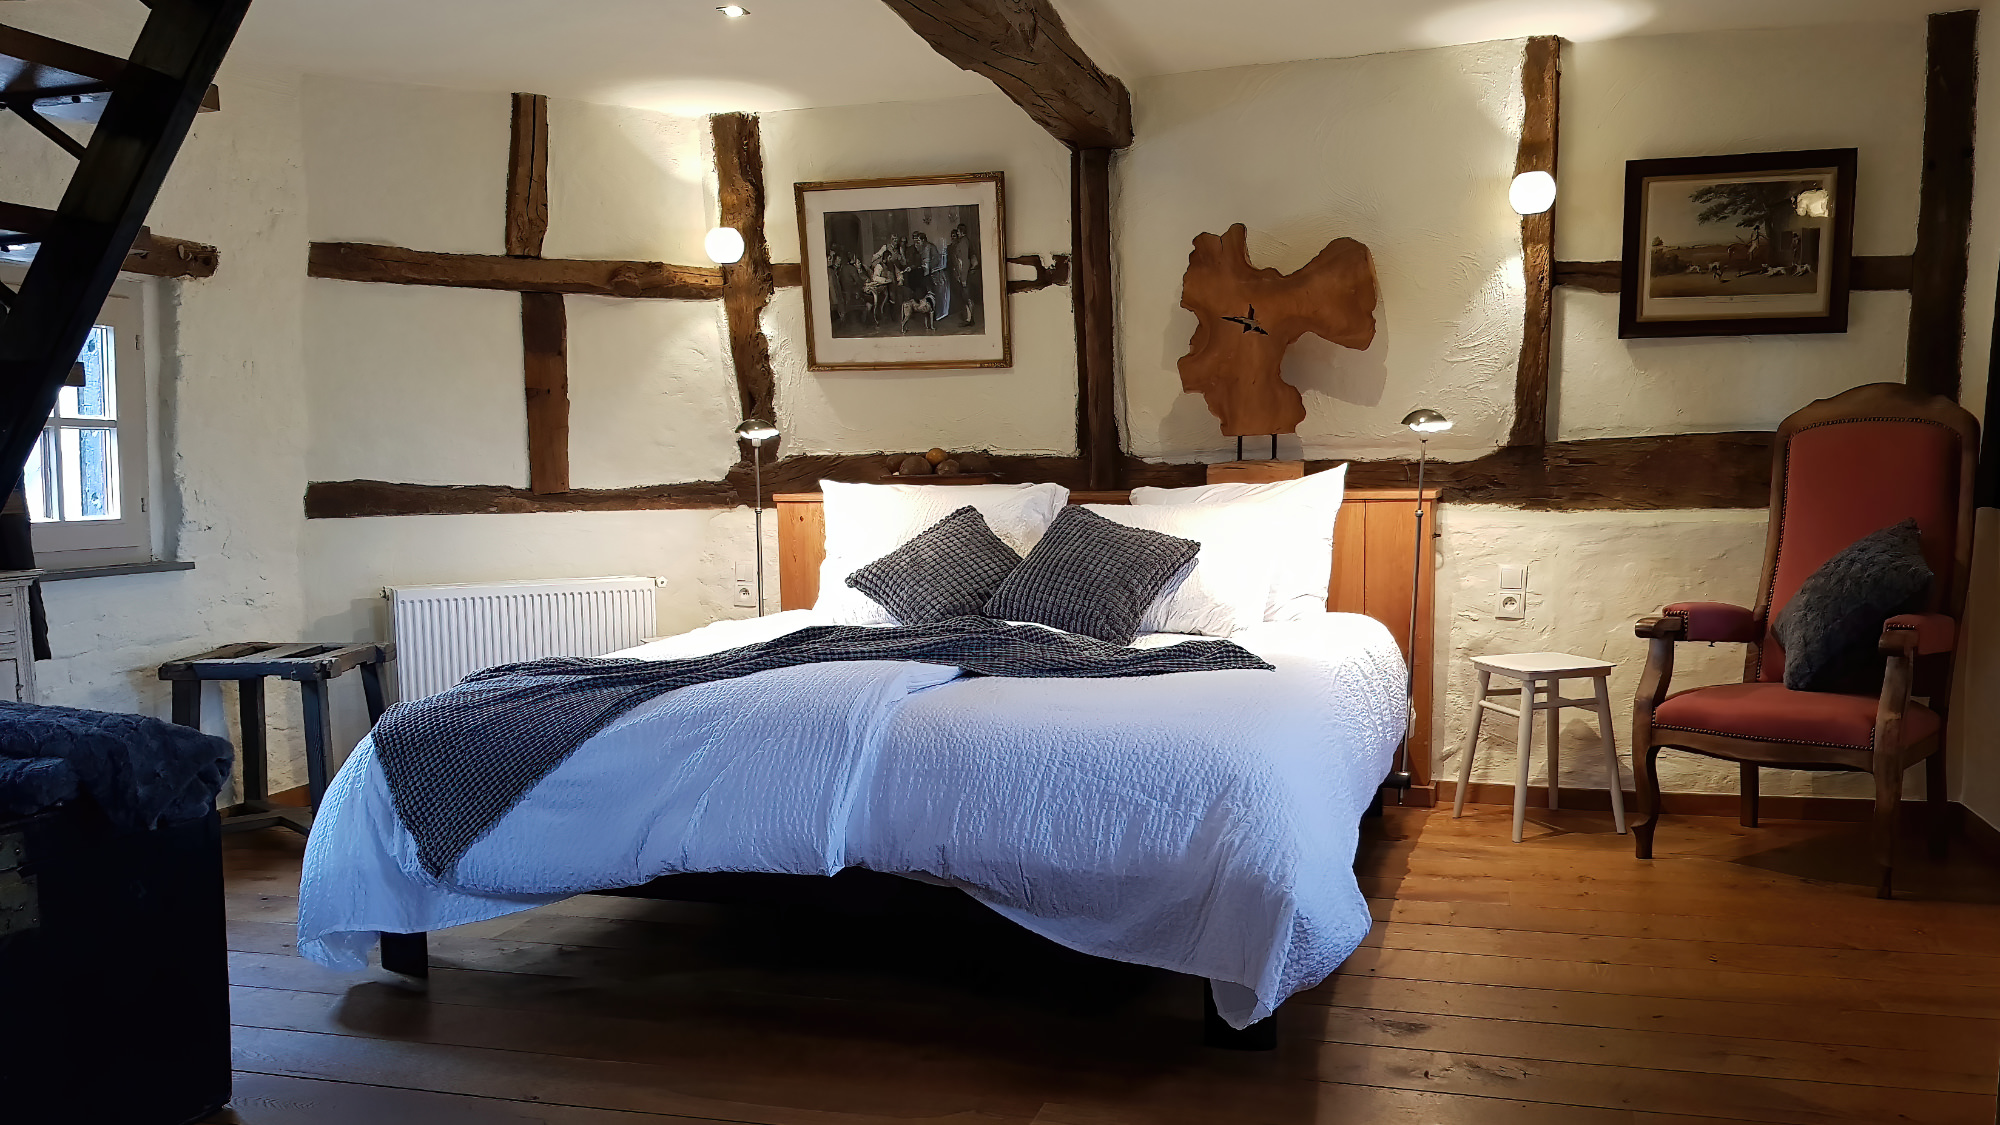 Luxurious bedroom with beam construction in an old farmhouse.